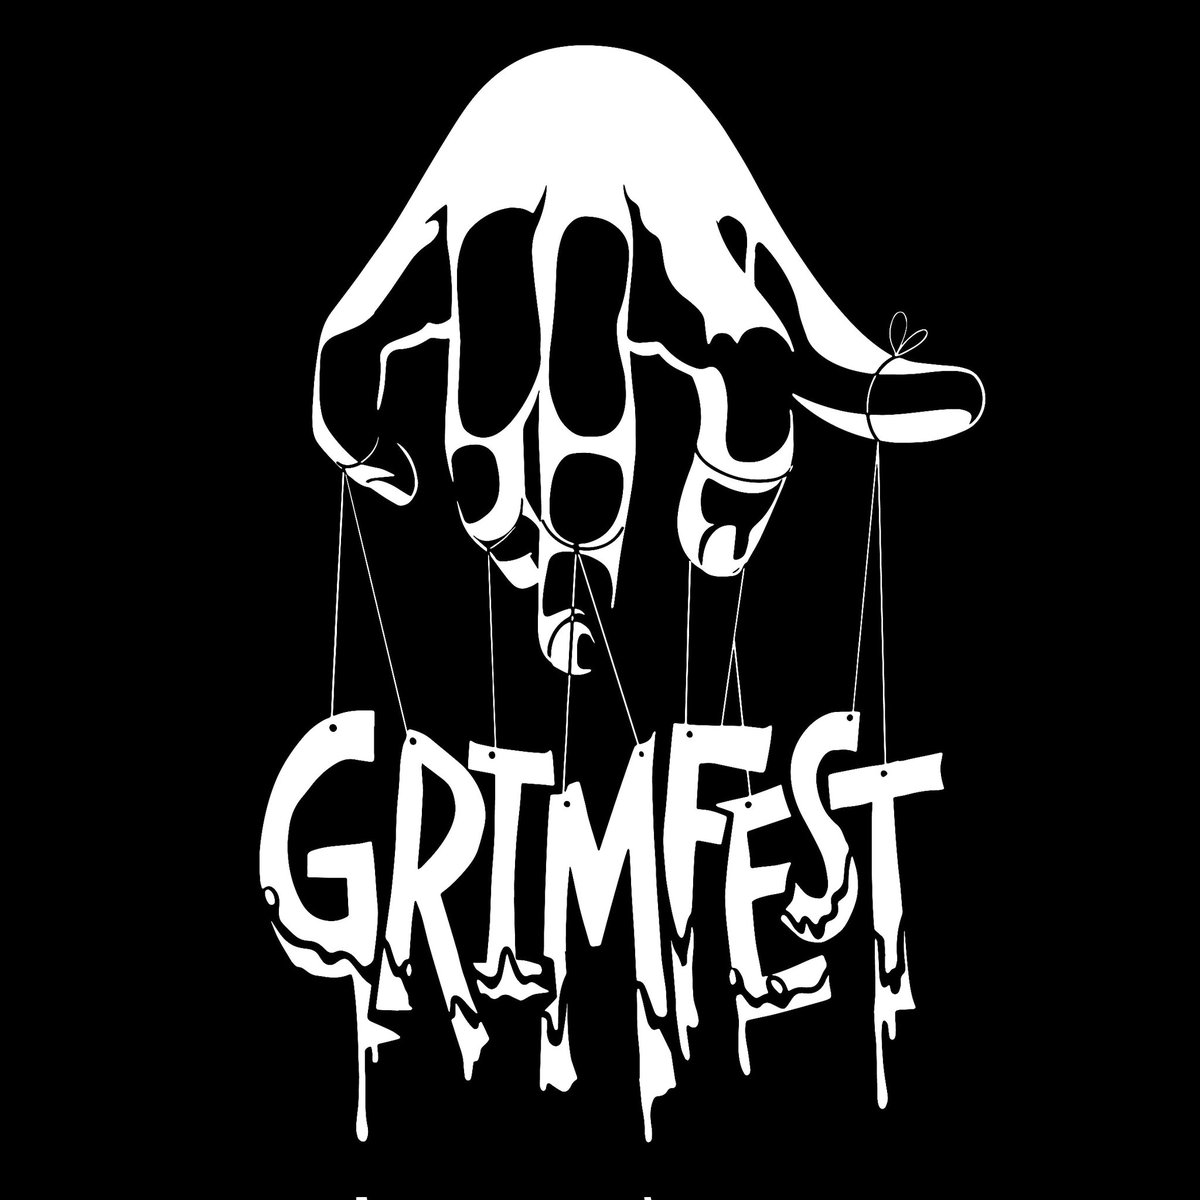 Applications are now OPEN for GrimFest 2024 - we want the best in horror theatre in our haunted pub this Halloween so check out our website for more details... #horror #theatre #cabaret #thriller #puppets #parody #storytelling #ghosts #mime #fear #blood #guts #grim